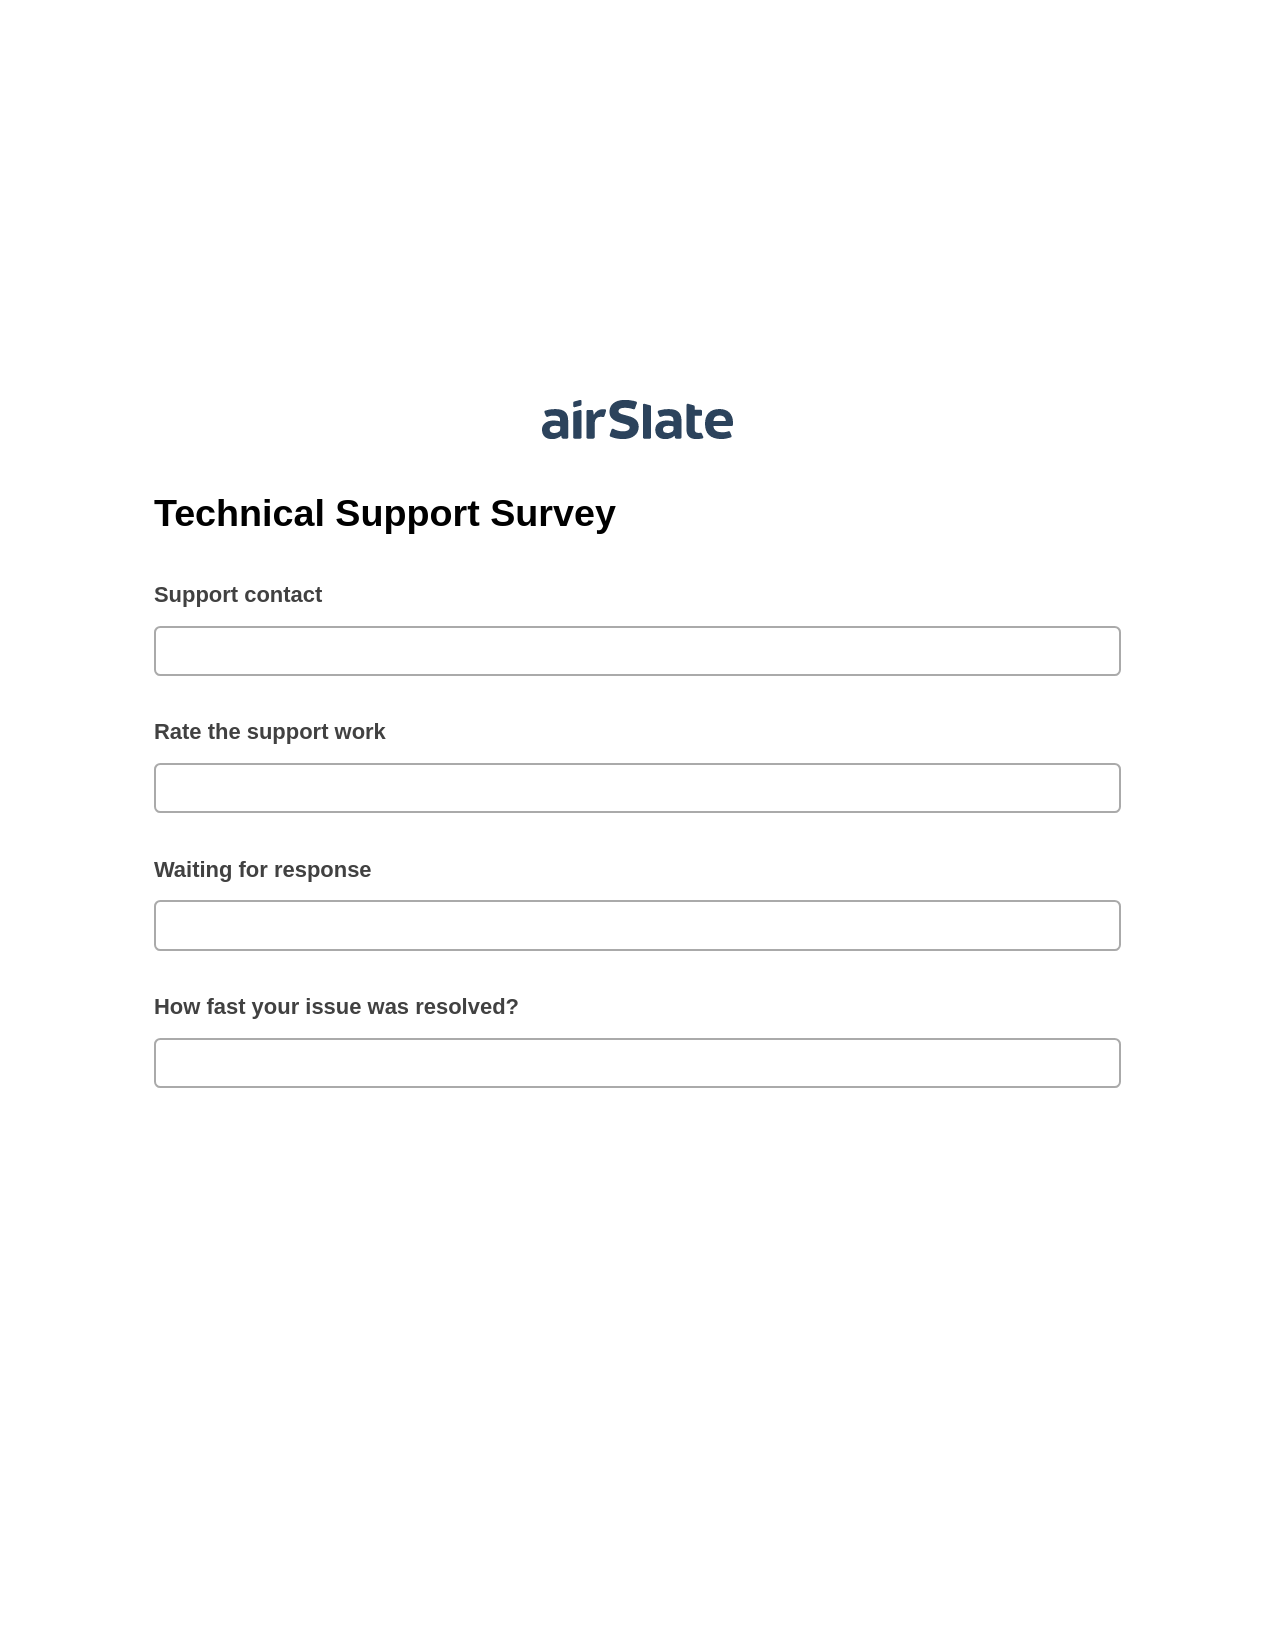 Technical Support Survey Pre-fill Dropdowns from MySQL Bot, Roles Reminder Bot, Export to Smartsheet